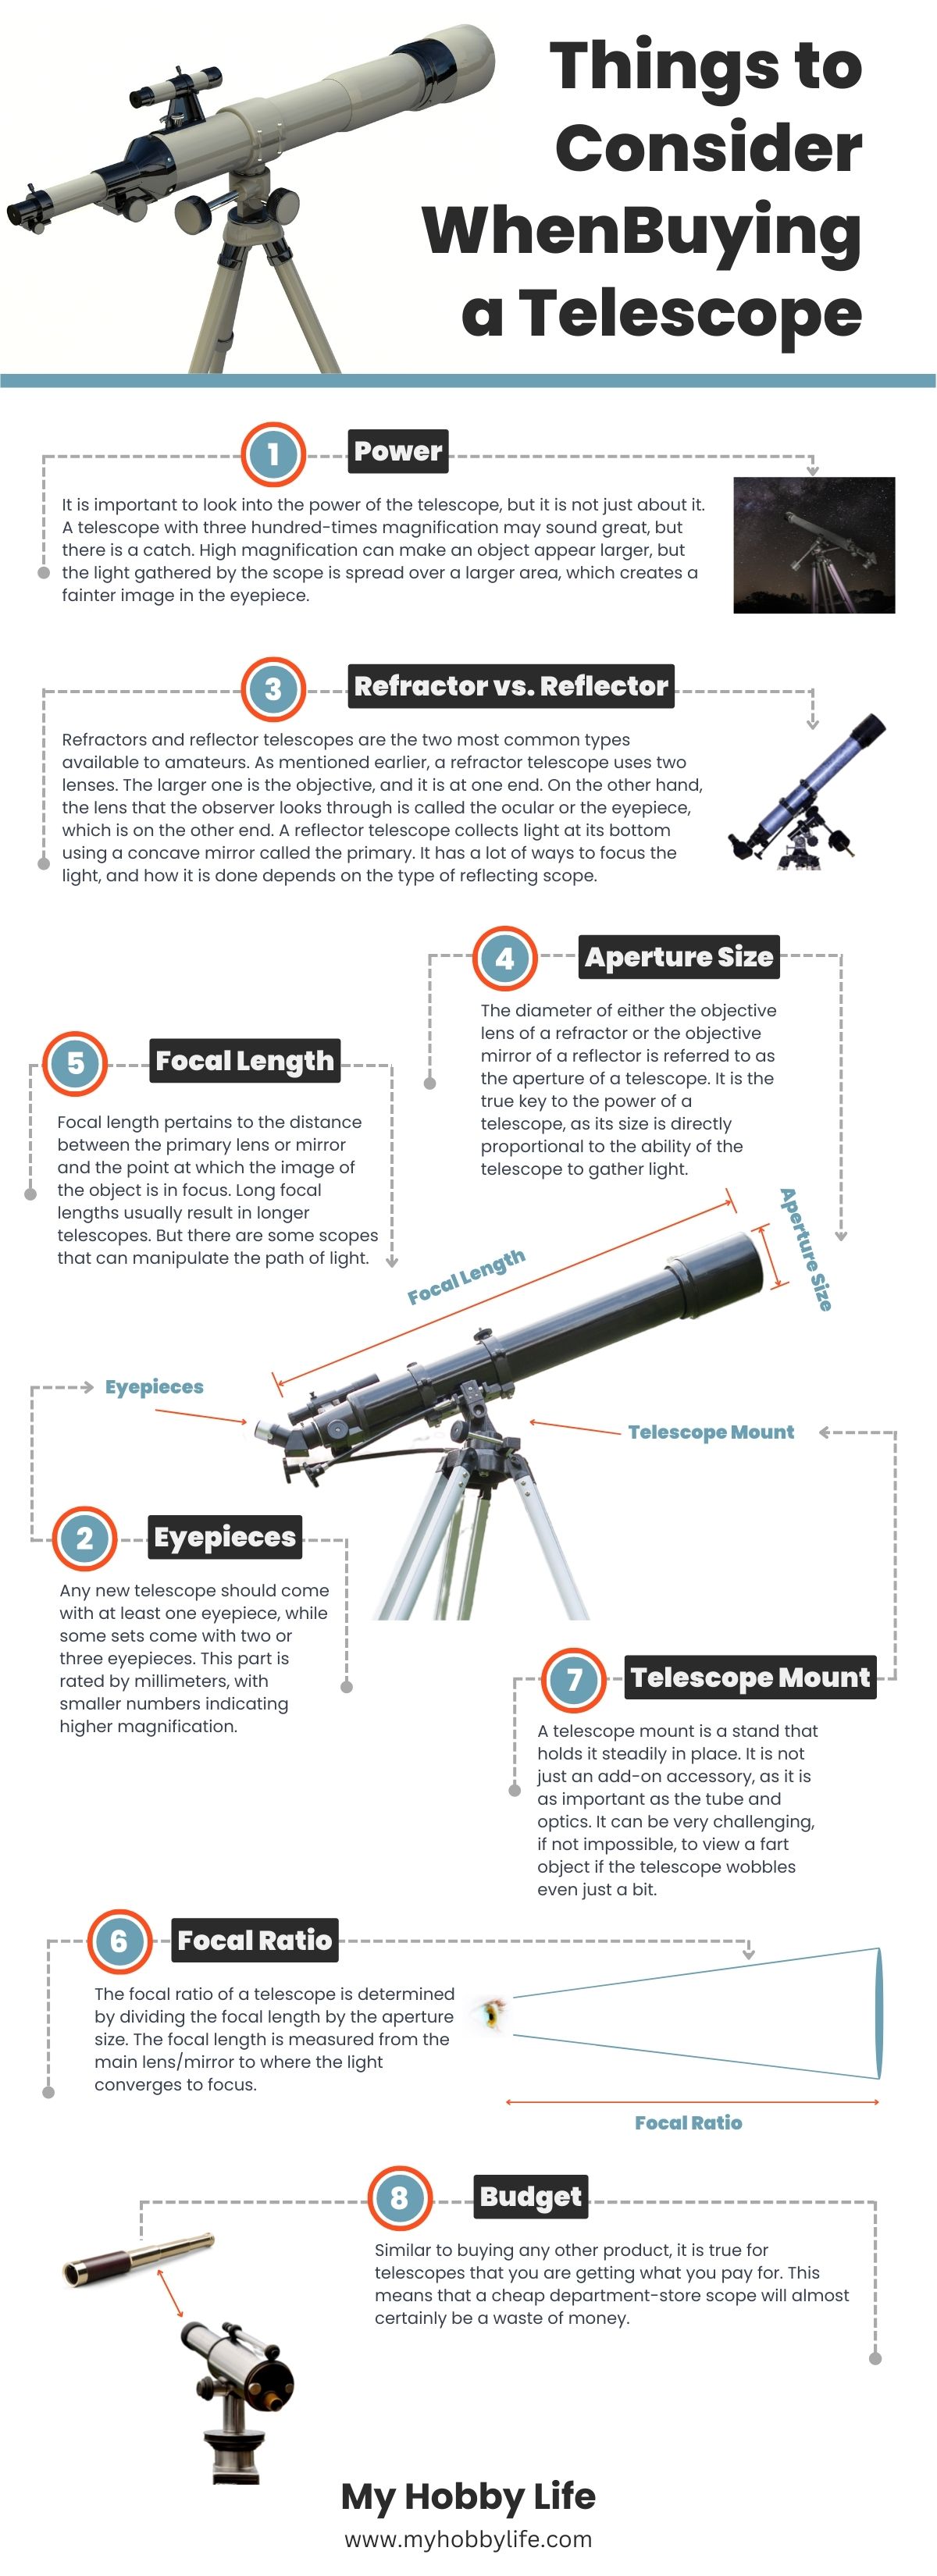 Things to Consider When Buying a Telescope